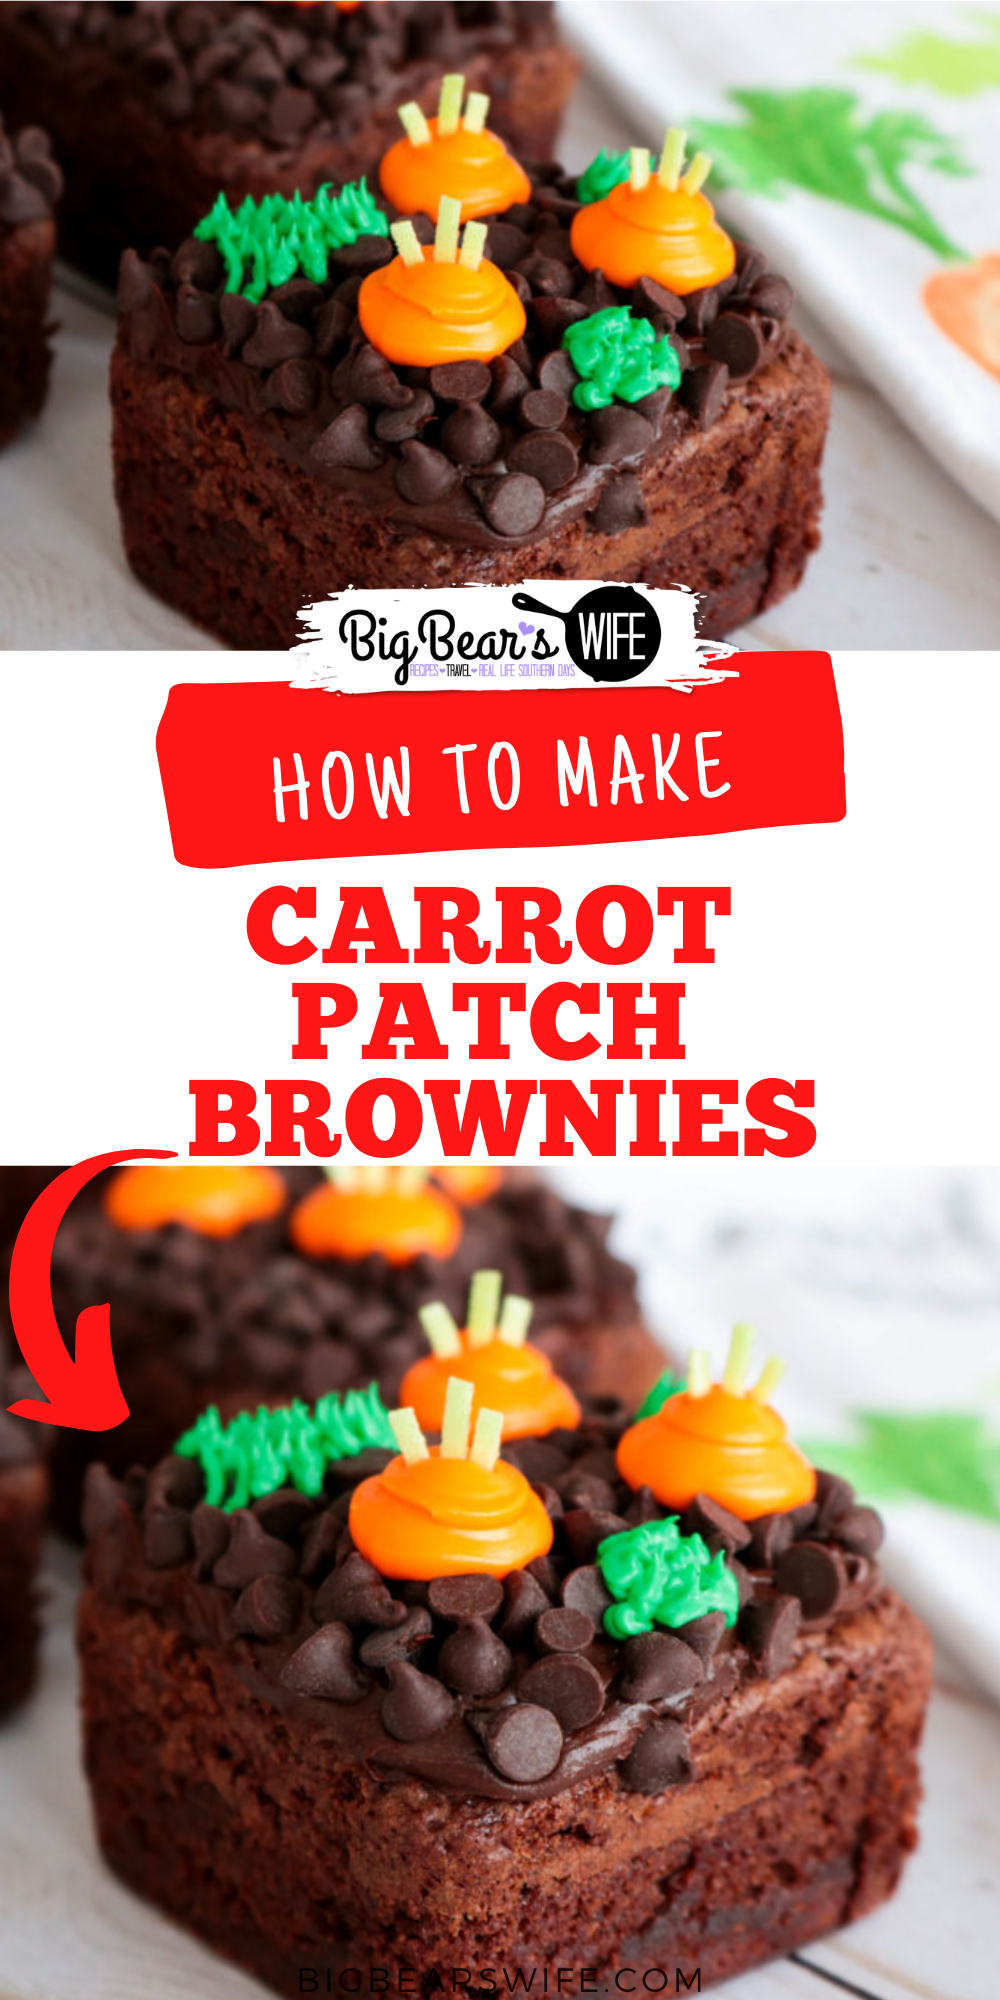 The Easter Bunny will be hopping around the corner any day now and he will love getting to snack on a few carrots from these Carrot Patch Brownies! They're easy to decorate and would look super cute as the sweet treat for any Easter or Spring time meal!  via @bigbearswife